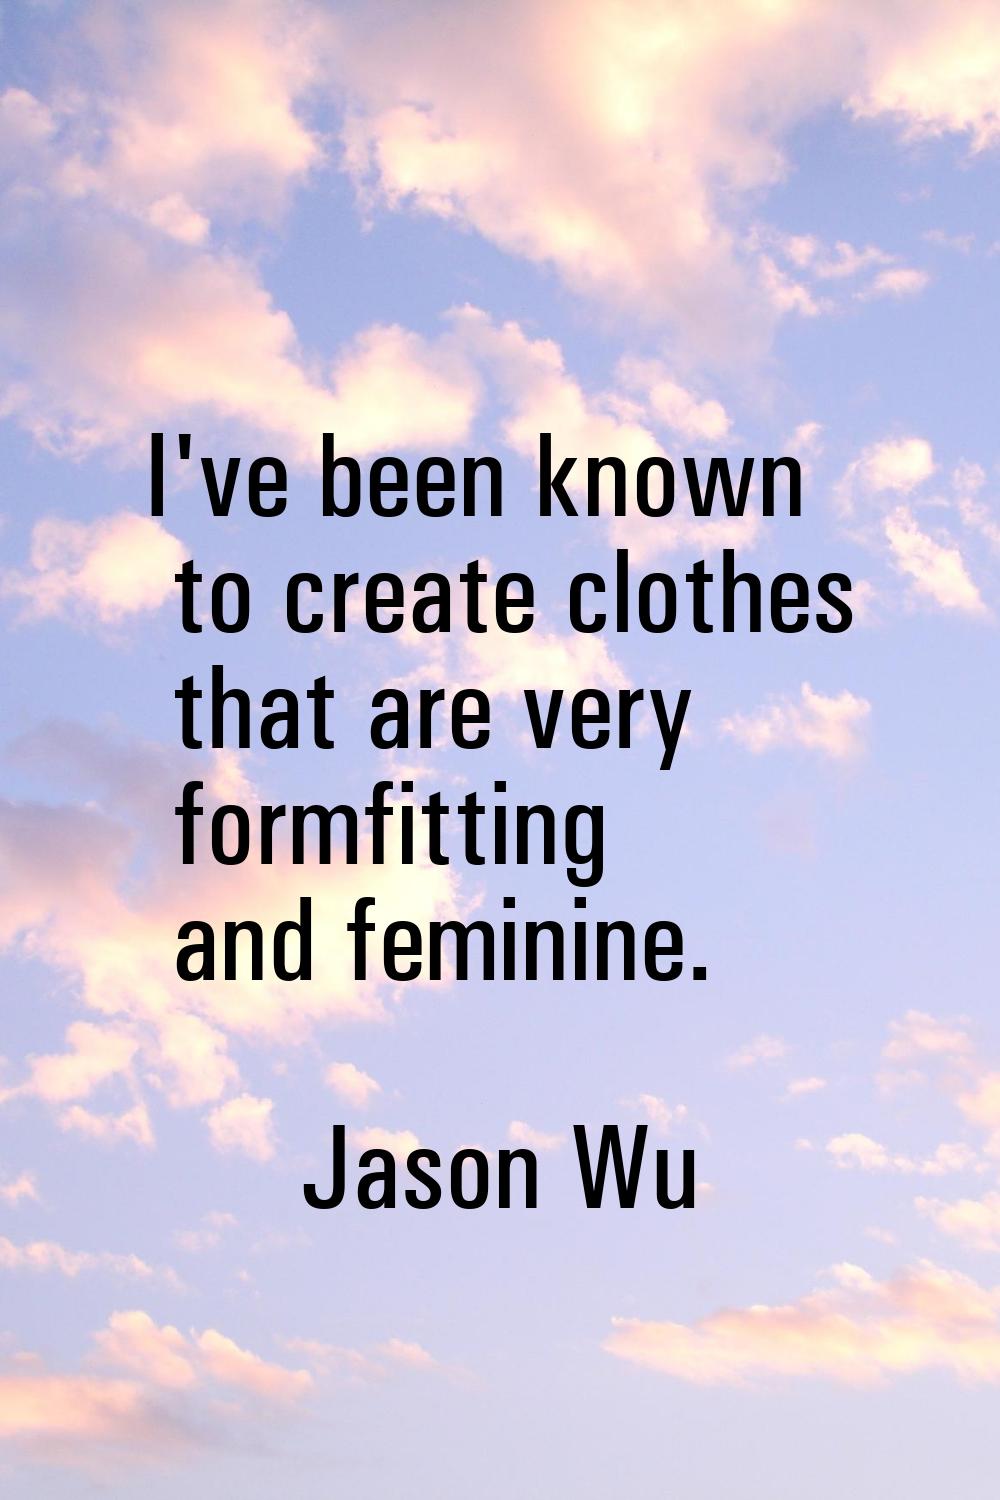 I've been known to create clothes that are very formfitting and feminine.